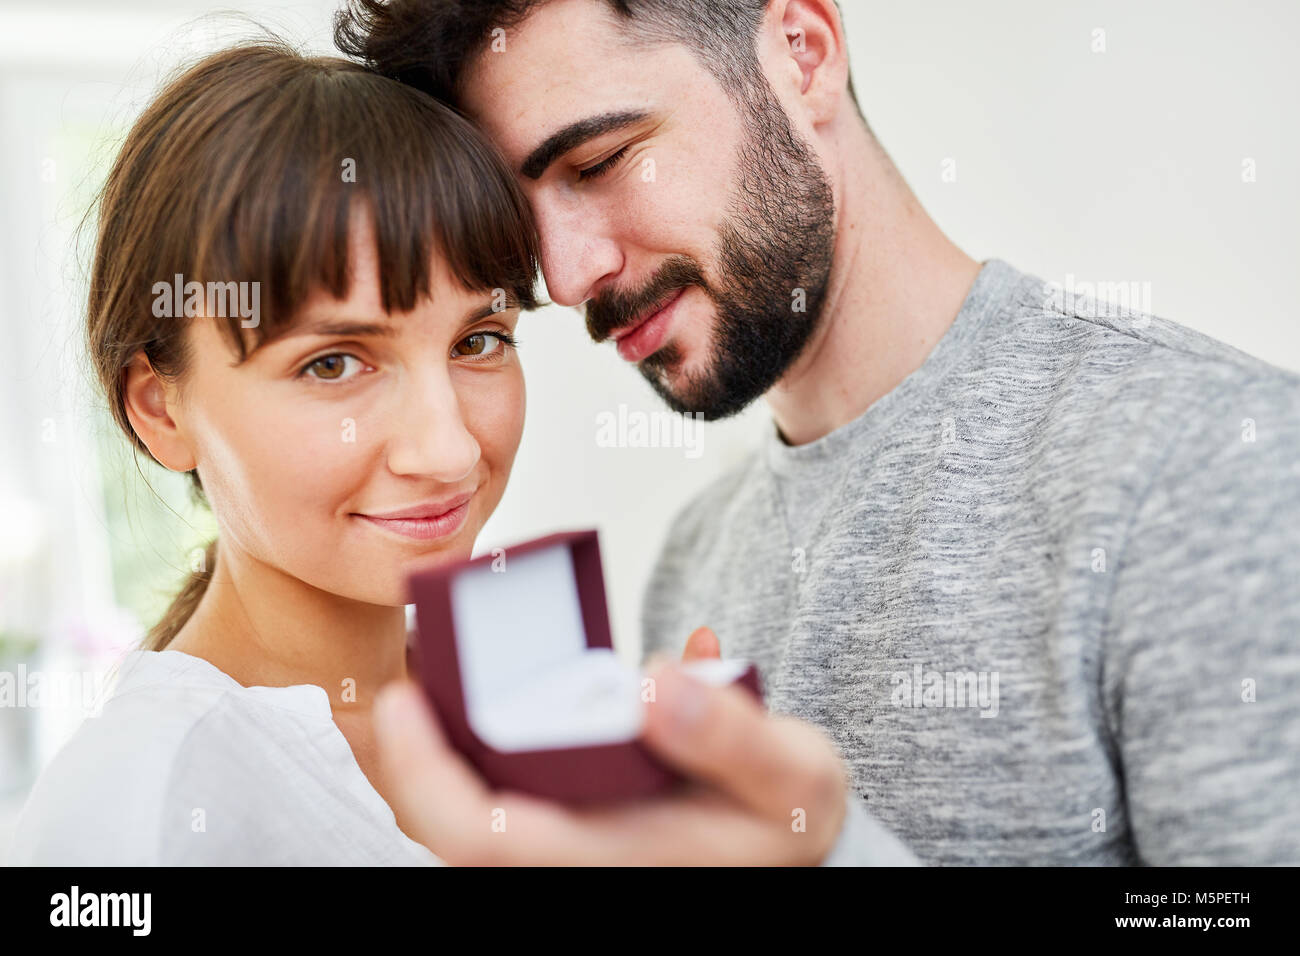 Young man with wedding rings in a box makes a declaration of love to woman Stock Photo